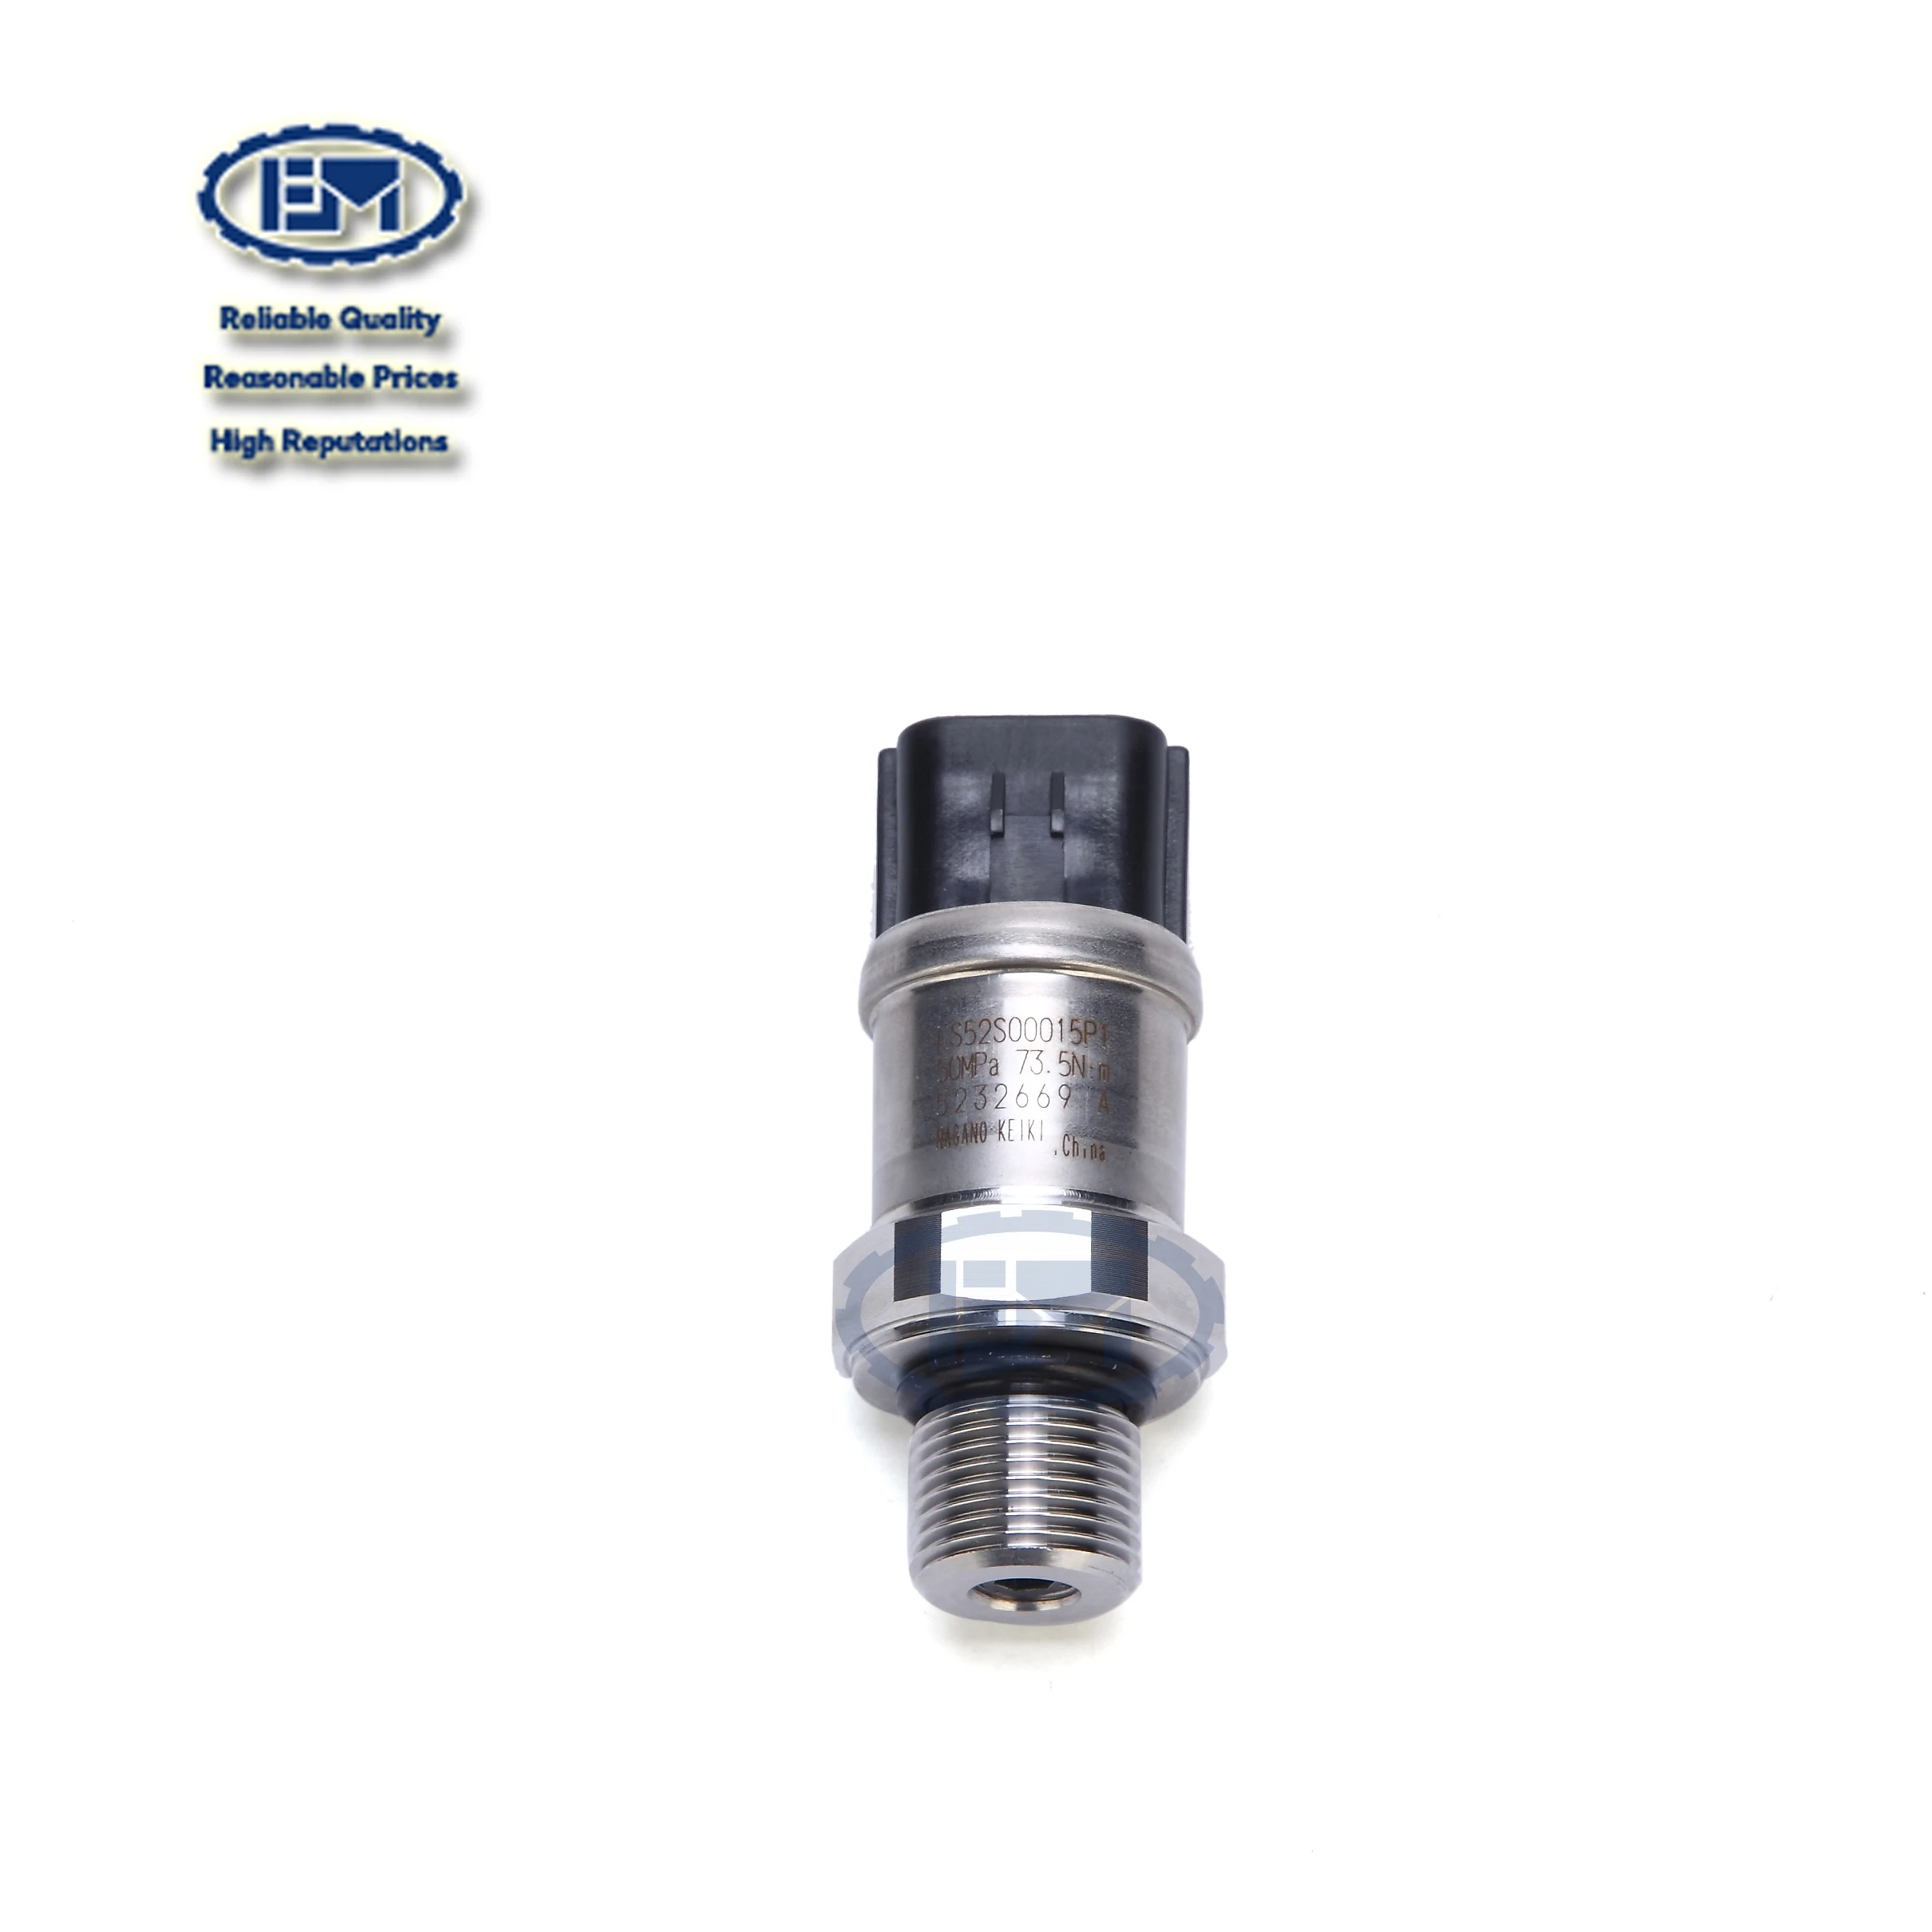 Details about   1PC NEW LS5200015P1 High Pressure Sensor For Kobelco SK200-8 #QB931YH ZX 